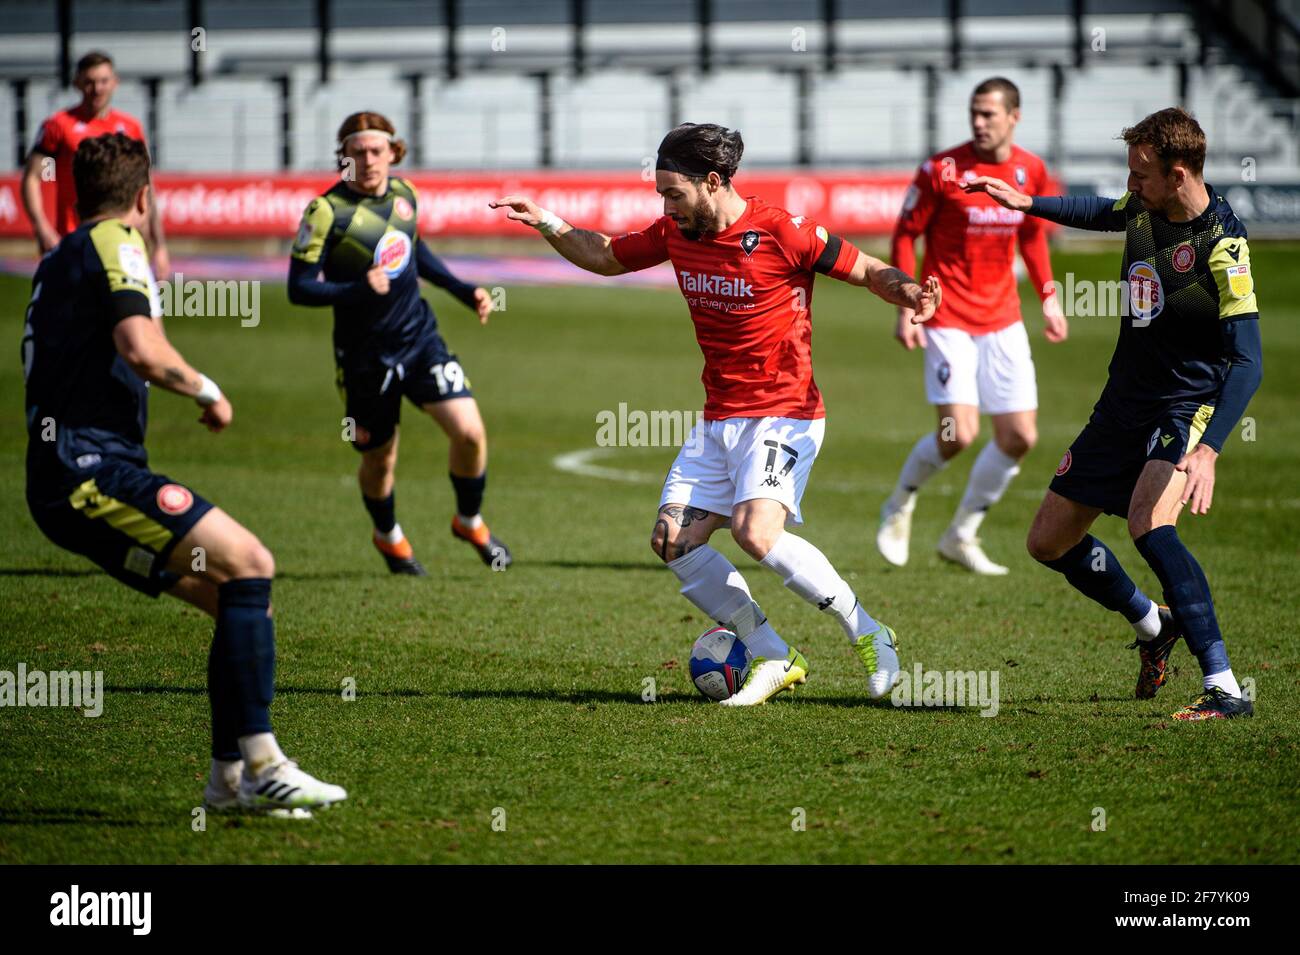 SALFORD, UK. APRIL 10TH: Richie Towell of Salford City FC under pressure from the Stevenage Defence during the Sky Bet League 2 match between Salford City and Stevenage at Moor Lane, Salford on Saturday 10th April 2021. (Credit: Ian Charles | MI News) Credit: MI News & Sport /Alamy Live News Stock Photo